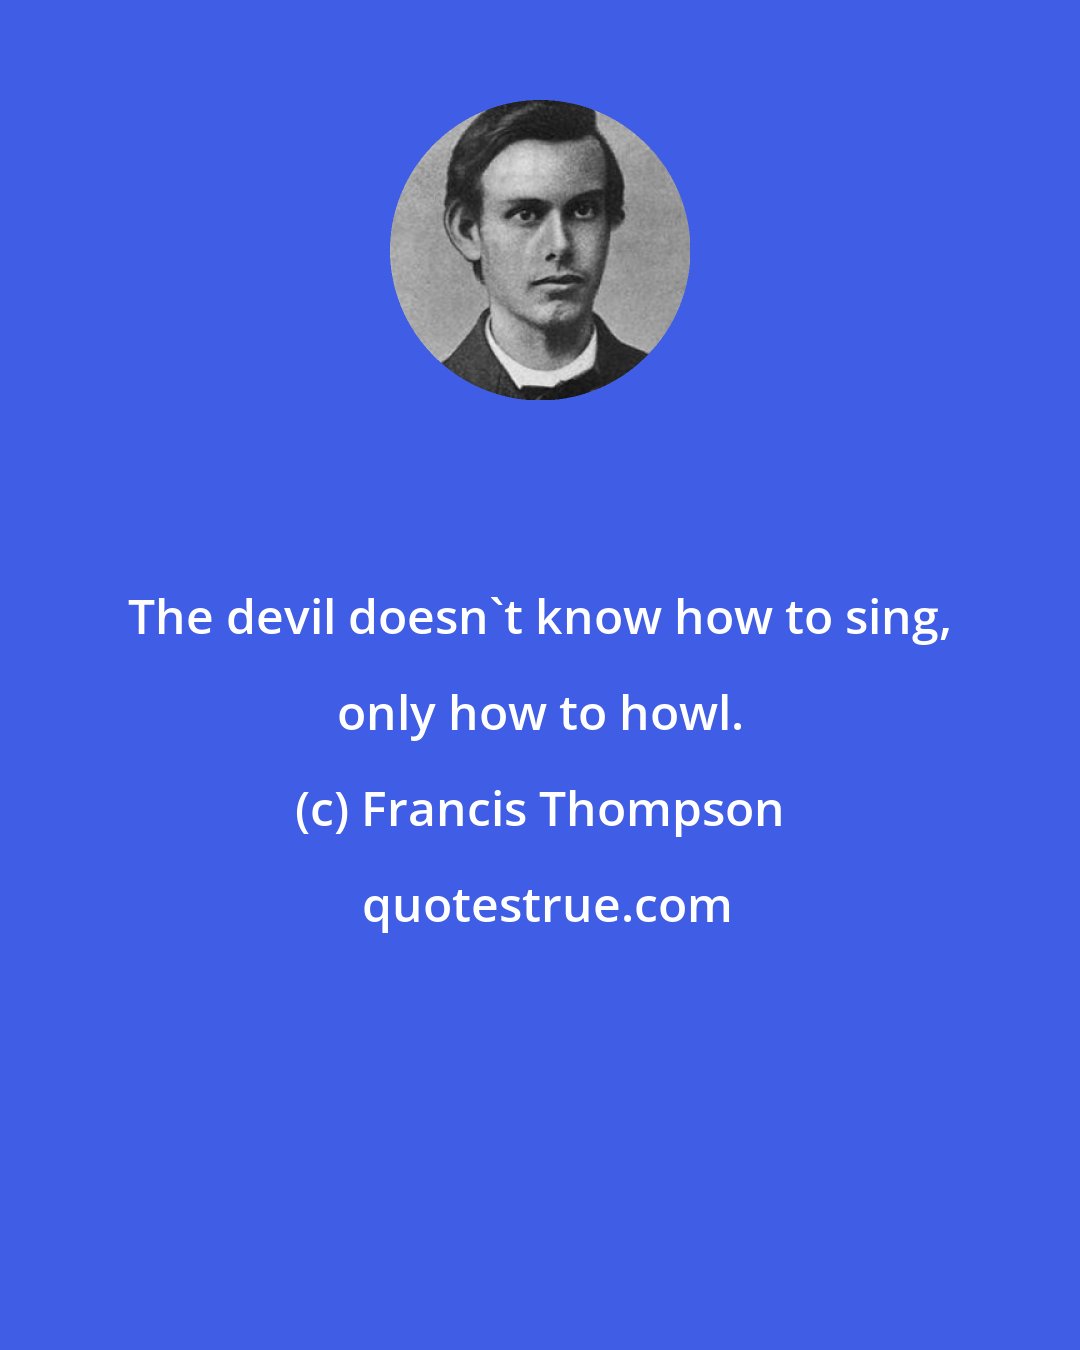 Francis Thompson: The devil doesn't know how to sing, only how to howl.